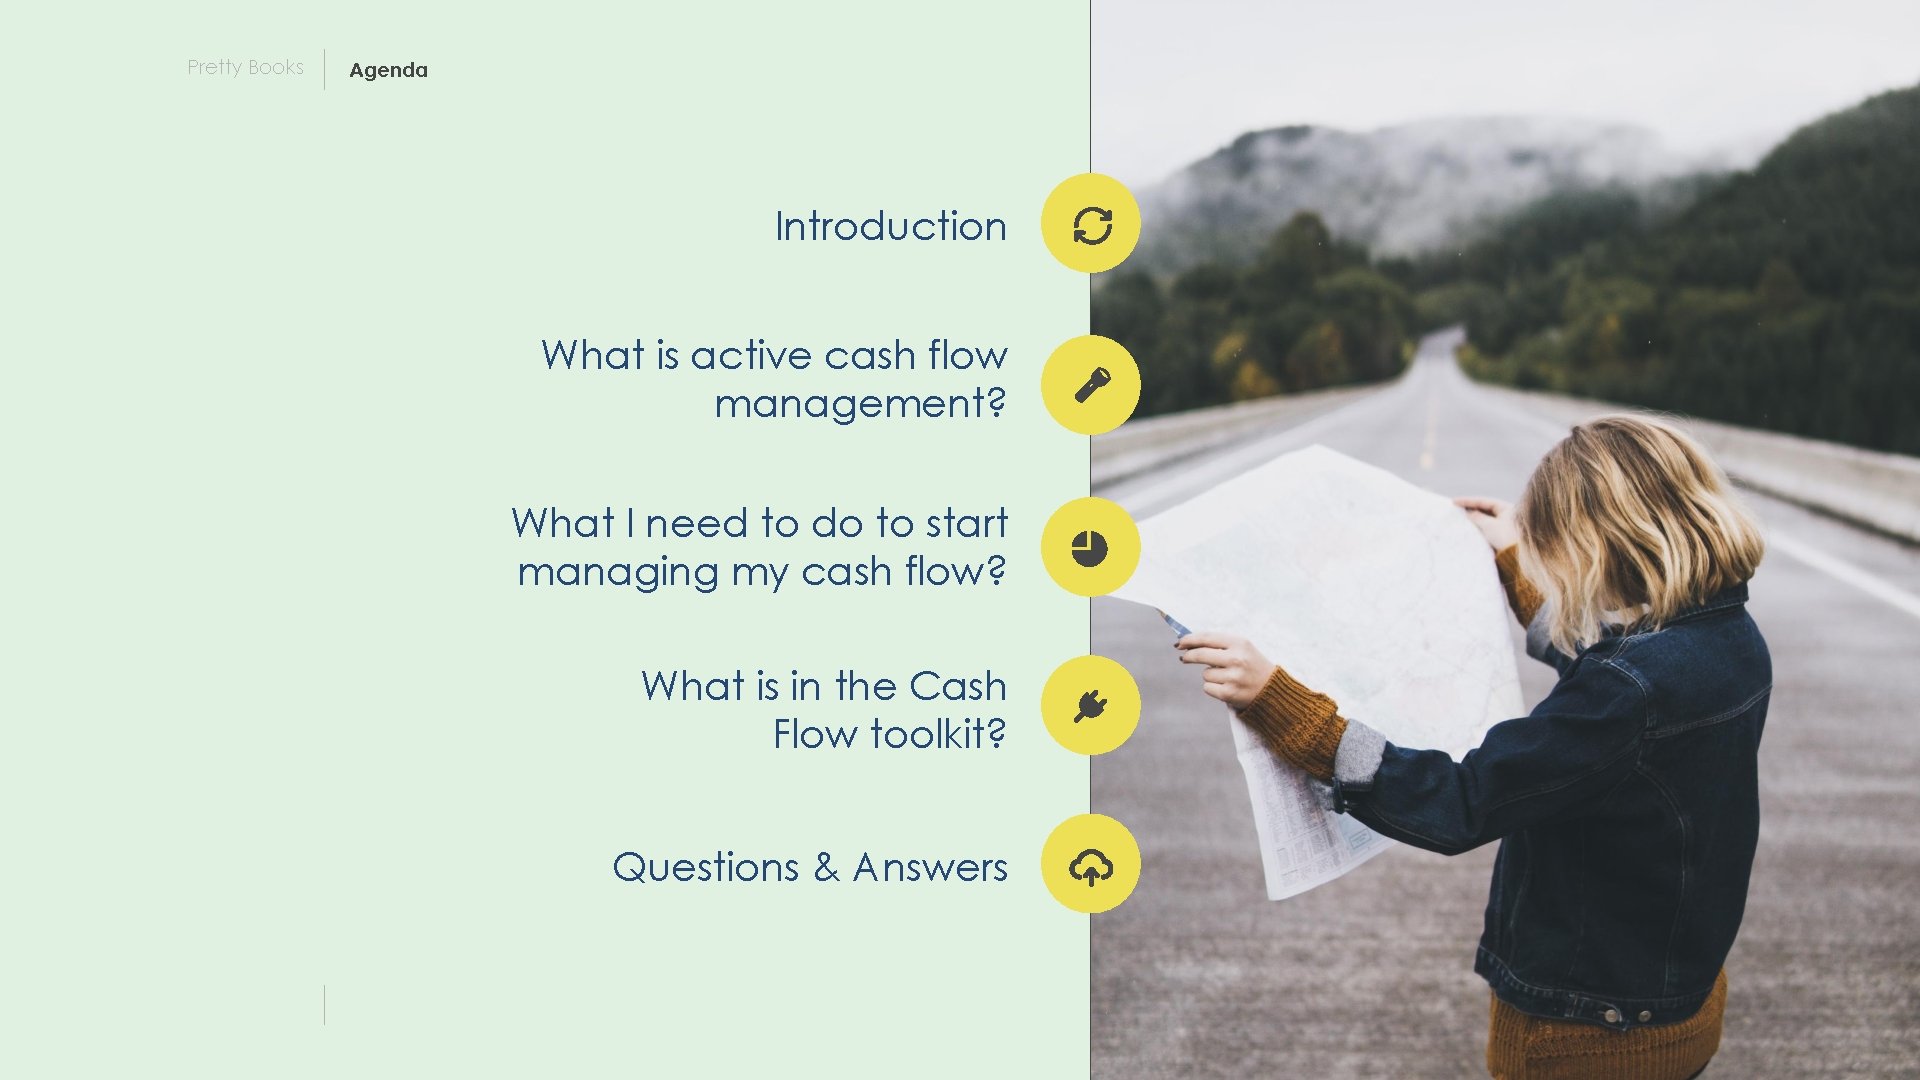 Pretty Books Agenda 3 Introduction What is active cash flow management? What I need